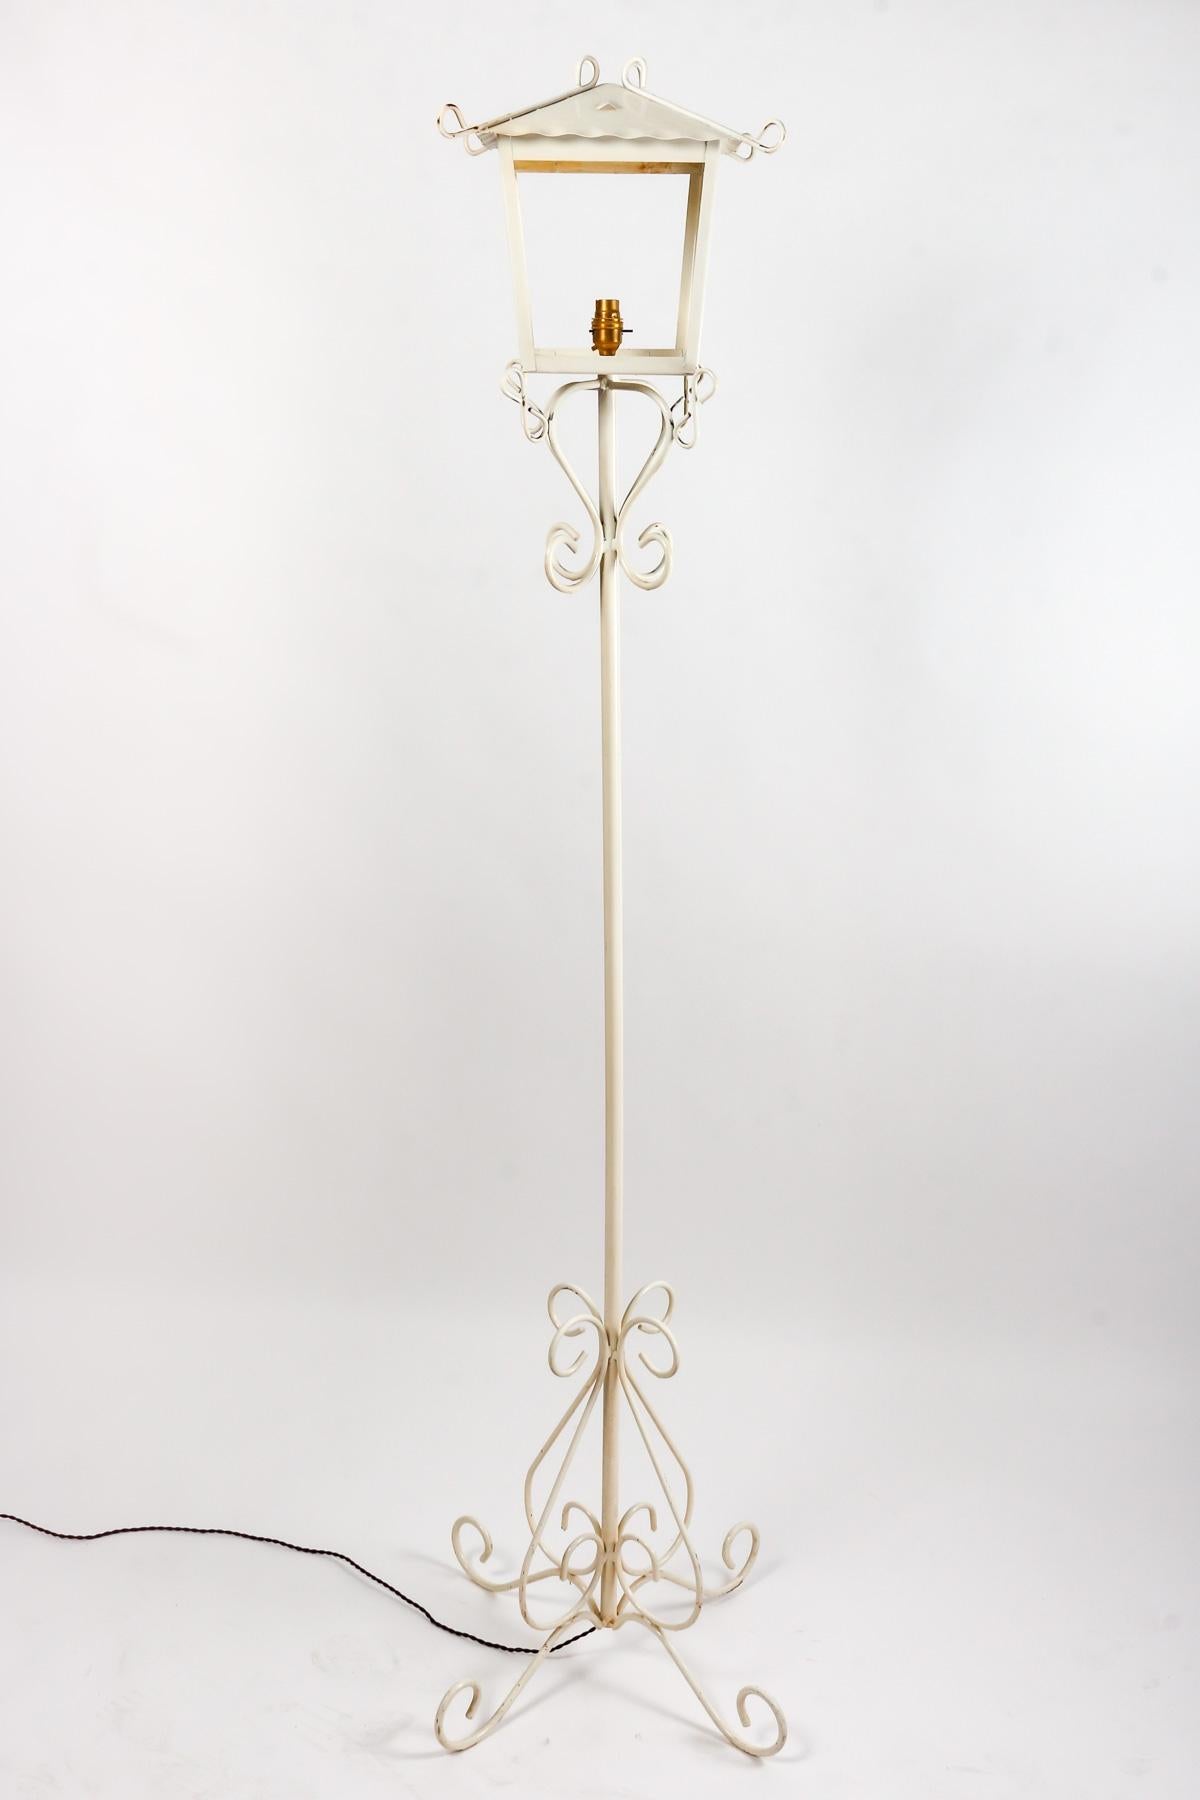 Mid-Century Modern Floor lamp in Painted Wrought Iron by Maison R.Gleizes, 1950-1960 Design. For Sale